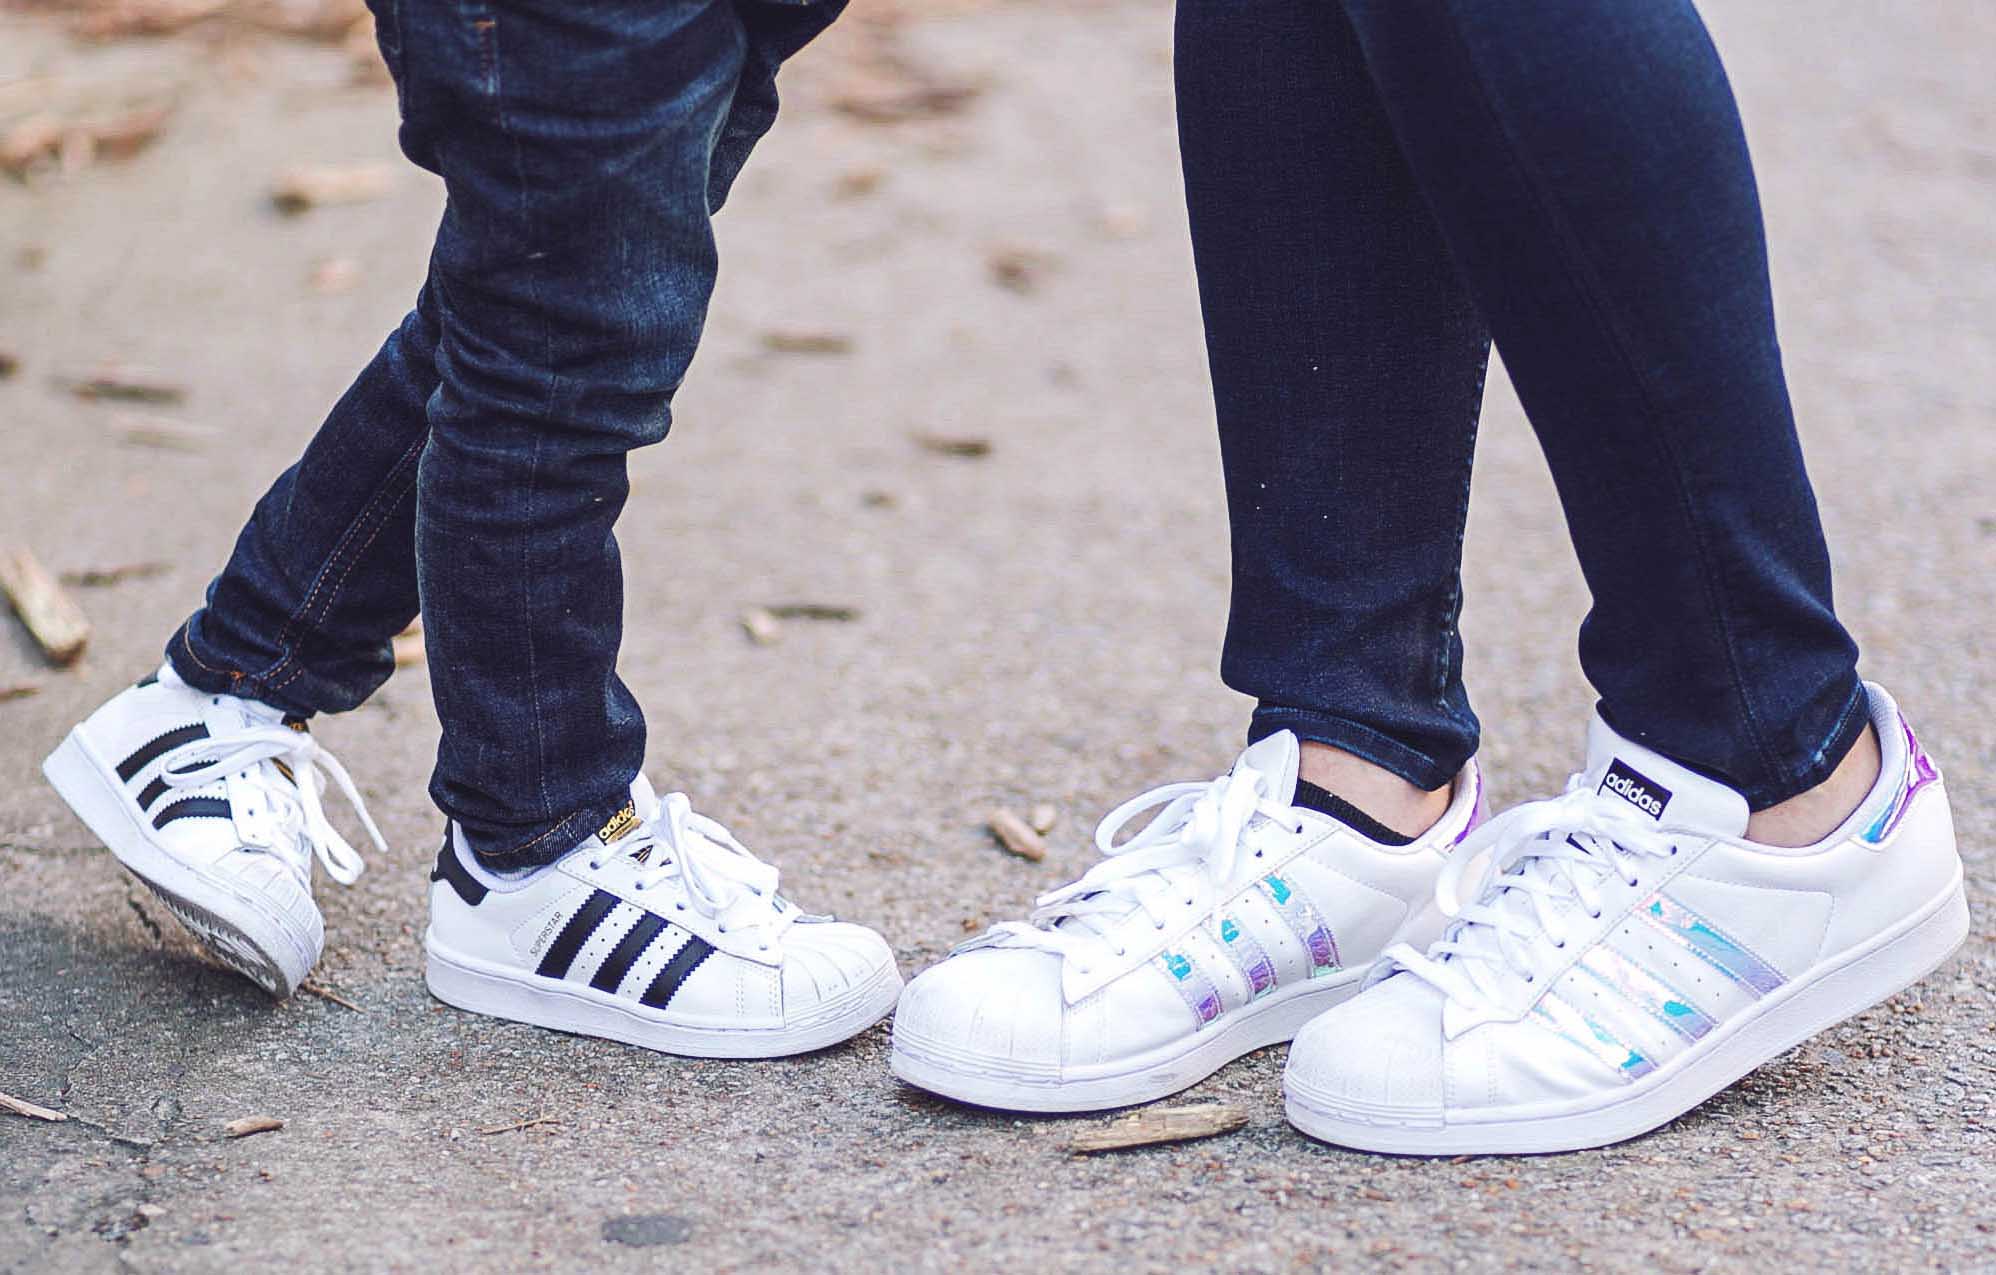 Matching Mother Son Outfits with Zappos by Atlanta fashion blogger Jessica from Happily Hughes